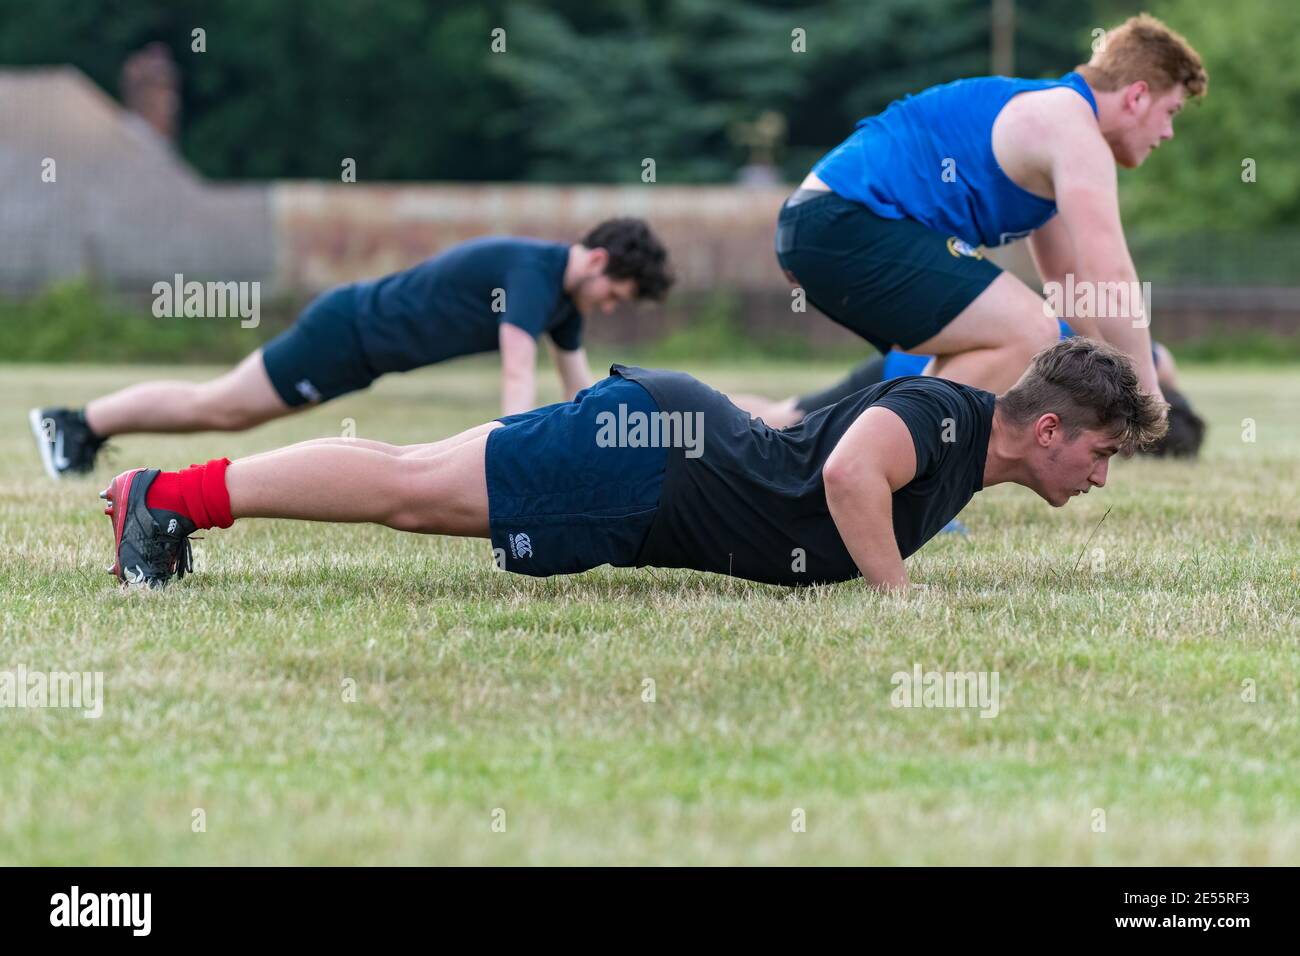 Three young men (late teens) wearing shorts and t-shirts doing press ups and burpees on grass field. Stock Photo